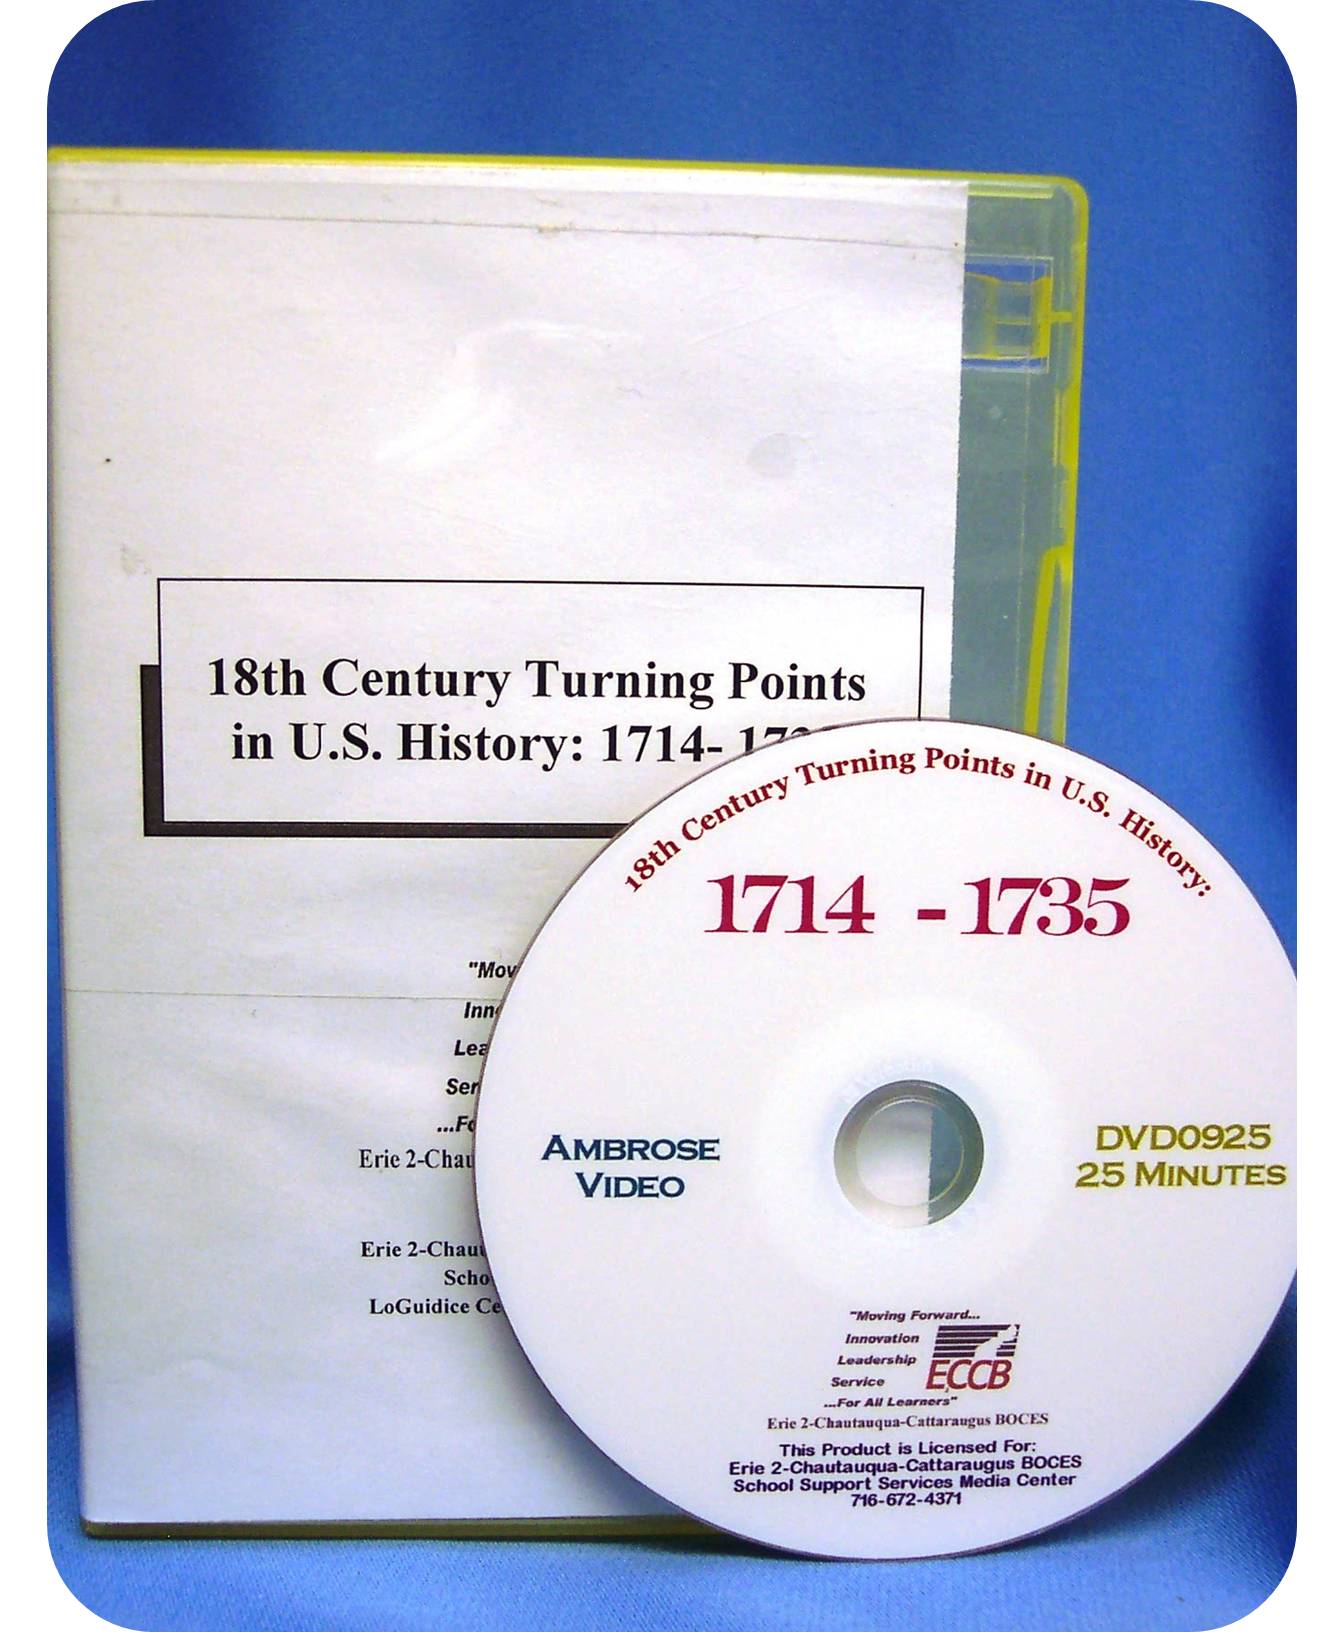 18th Century Turning Points in U.S. History: 1714- 1735